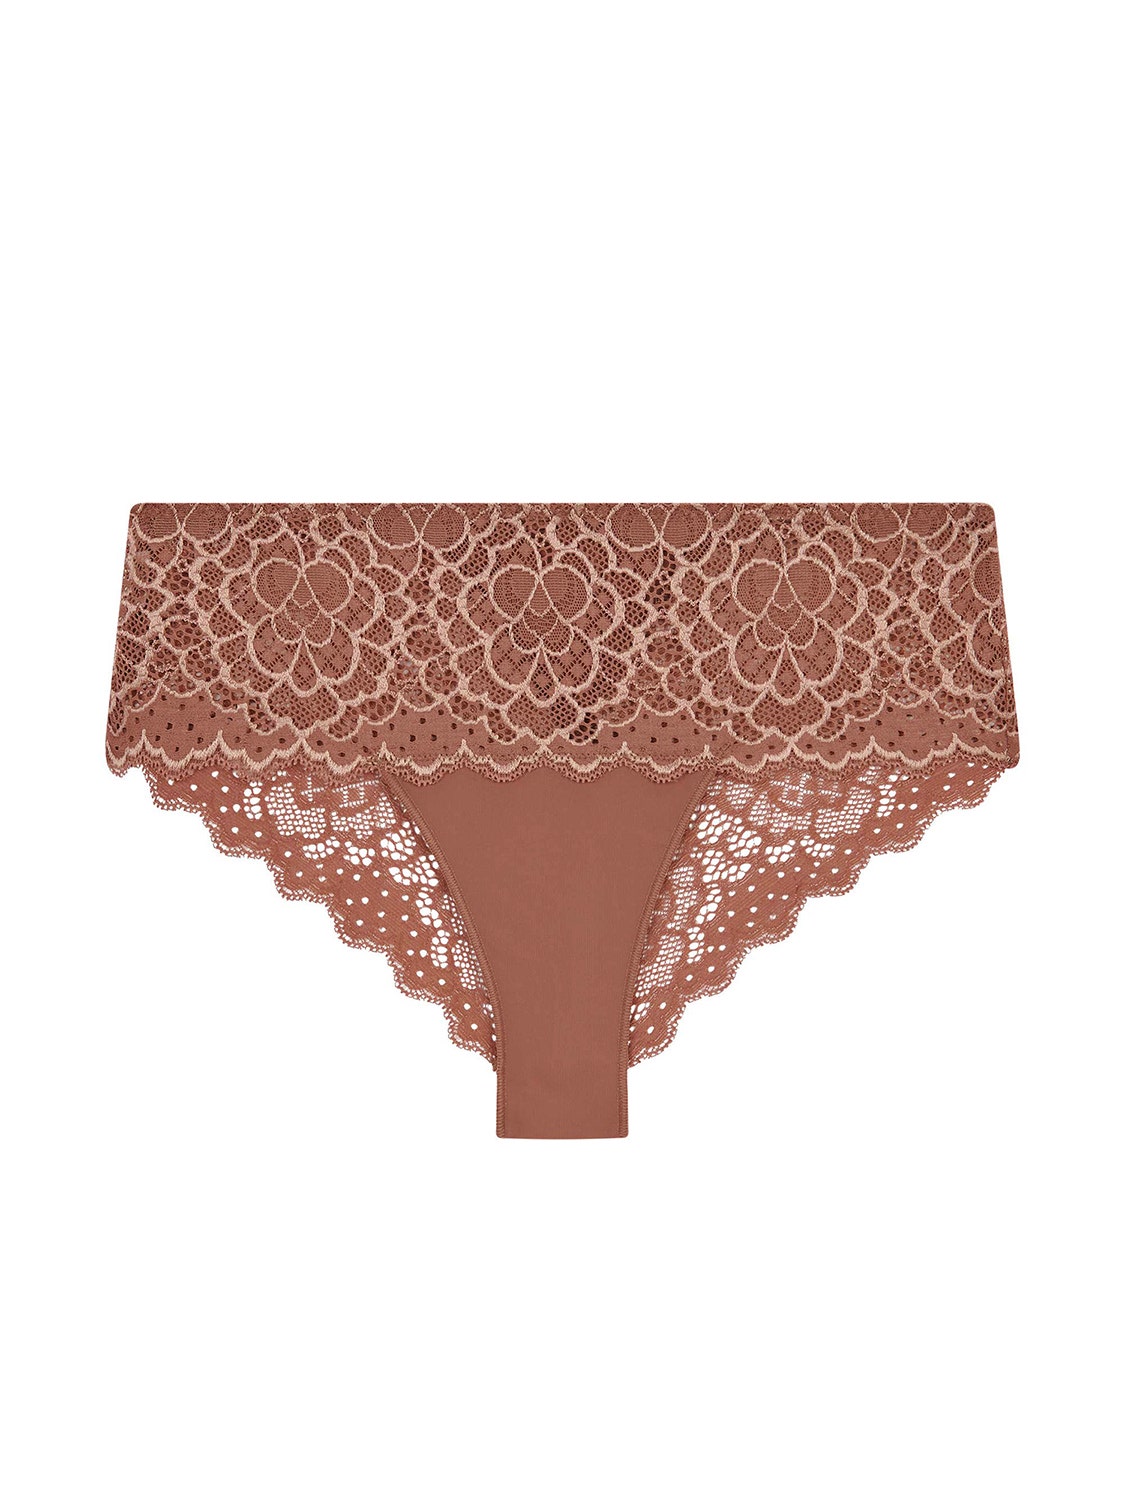 shorty-coco-brown-caresse-40